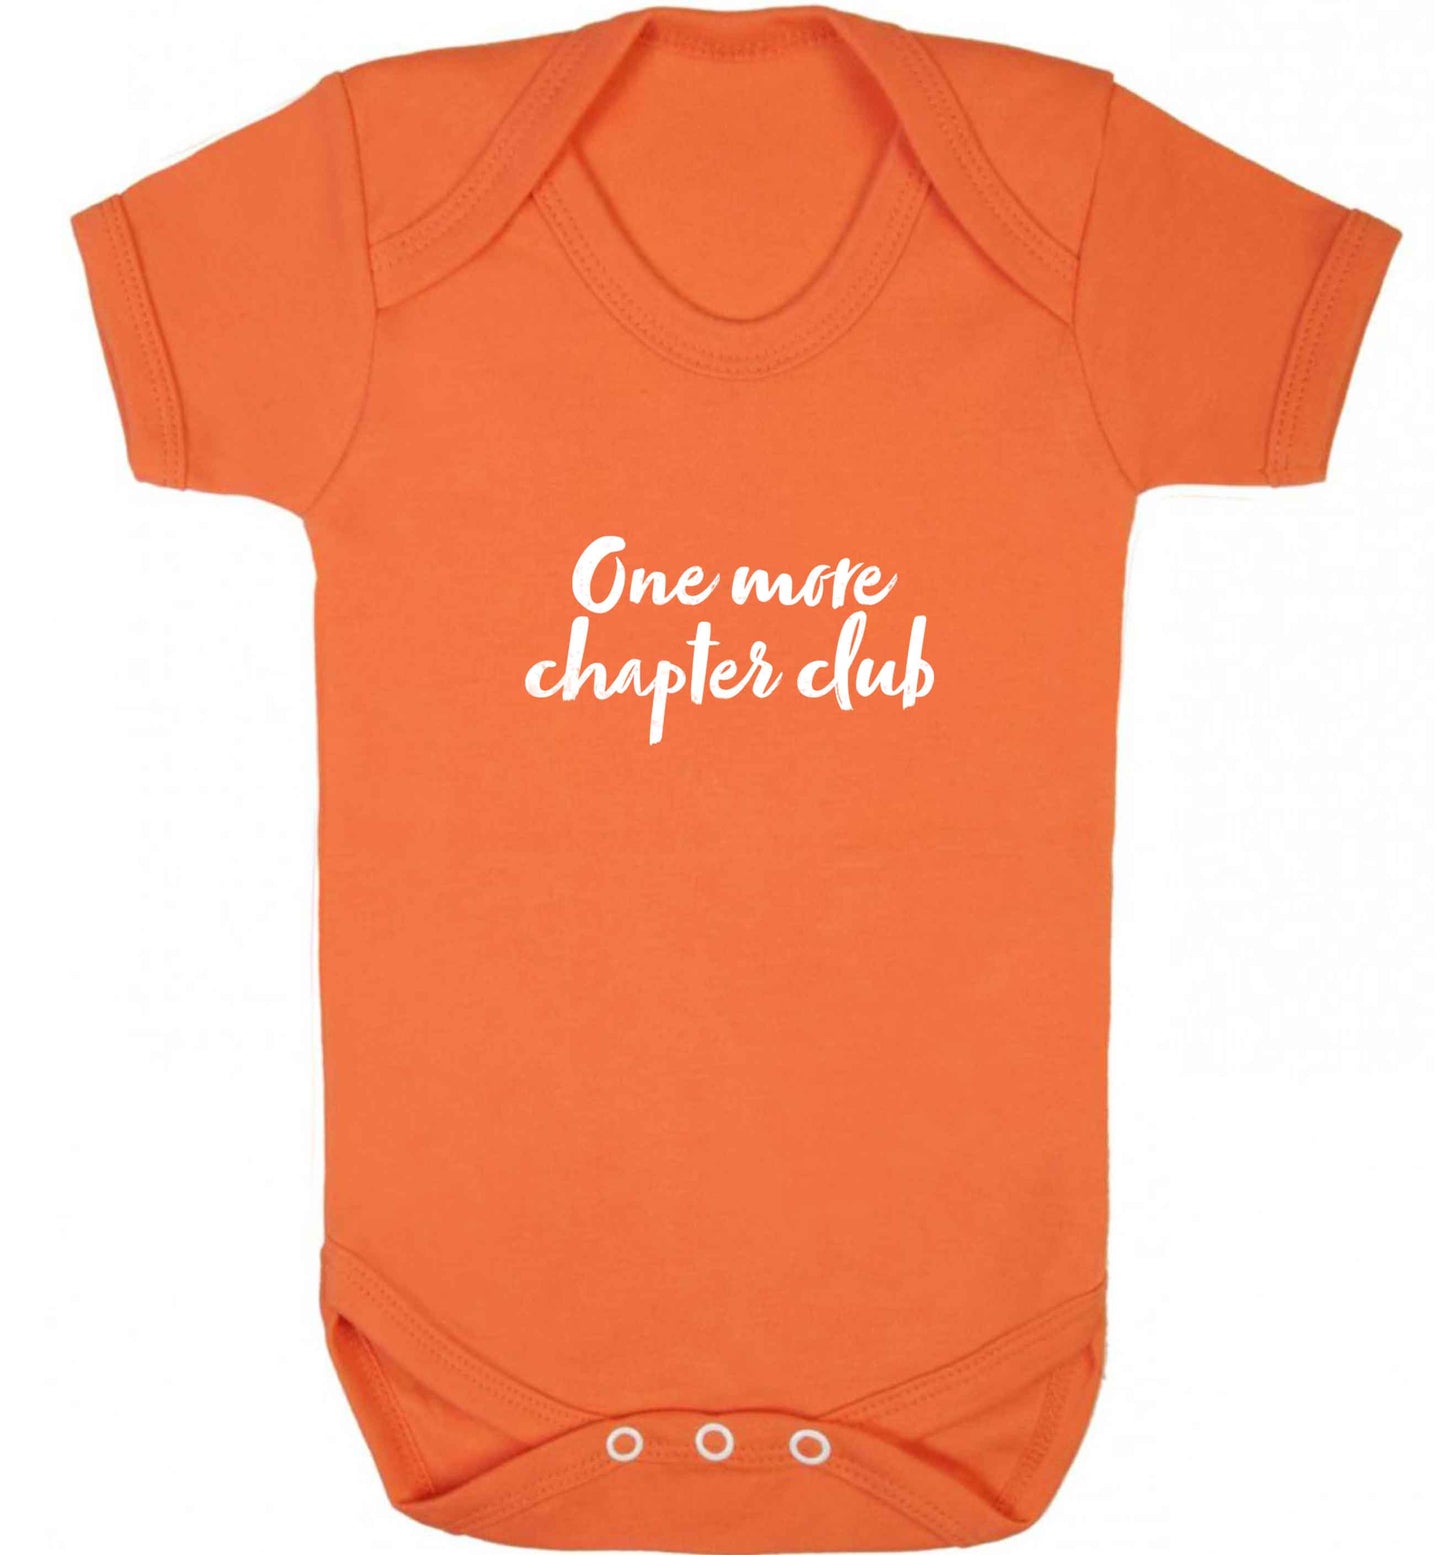 One more chapter club Kit baby vest orange 18-24 months